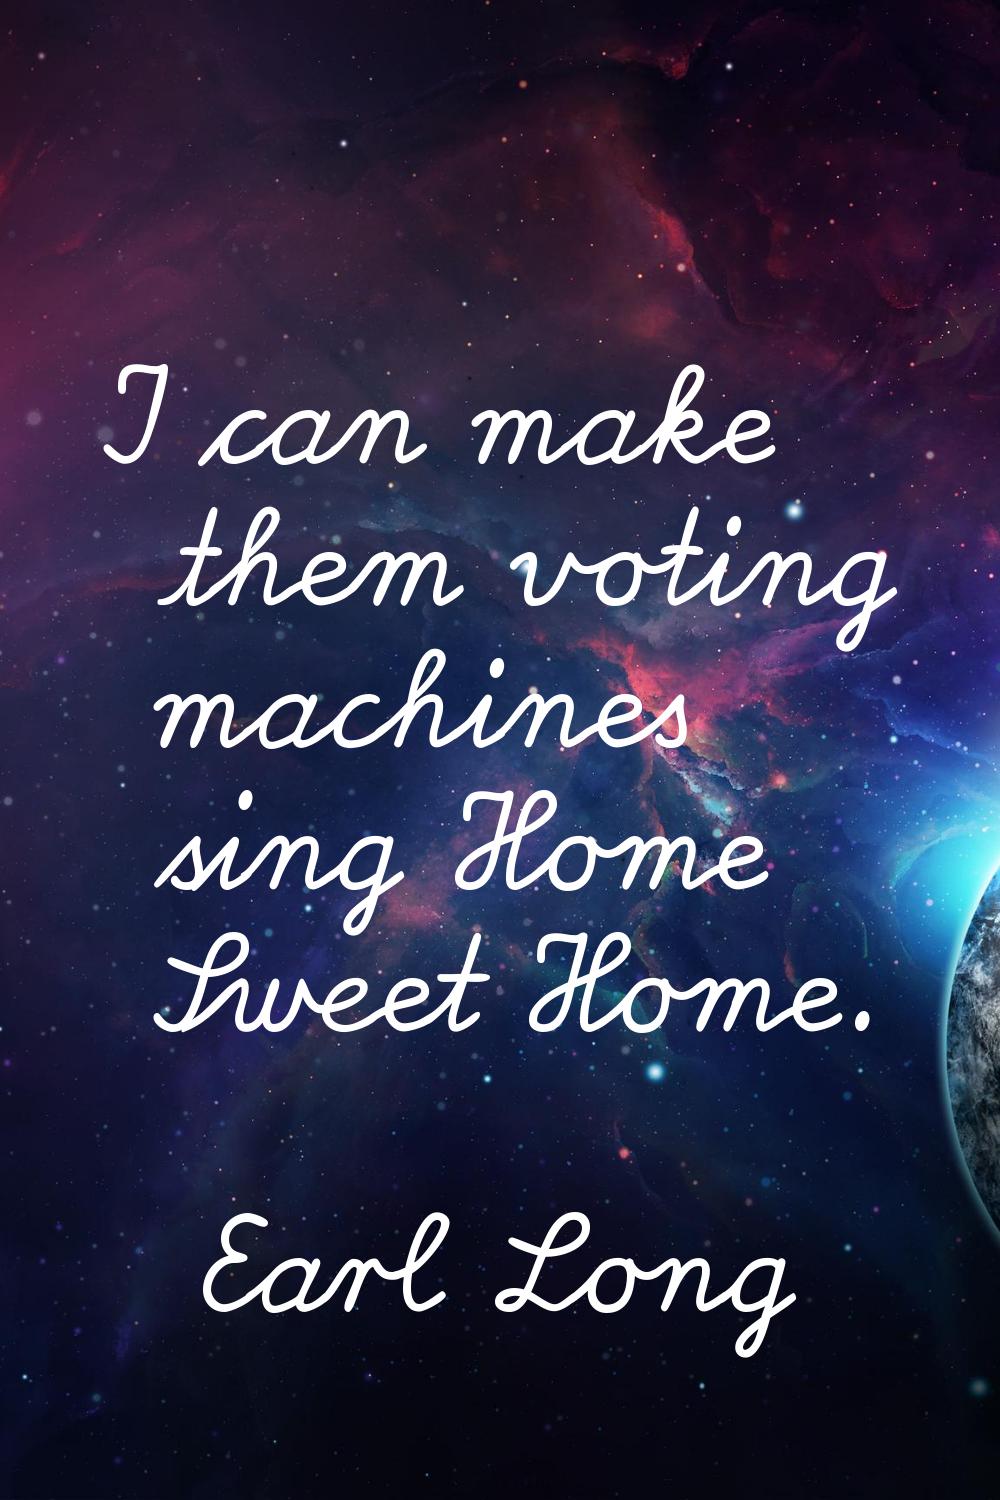 I can make them voting machines sing Home Sweet Home.